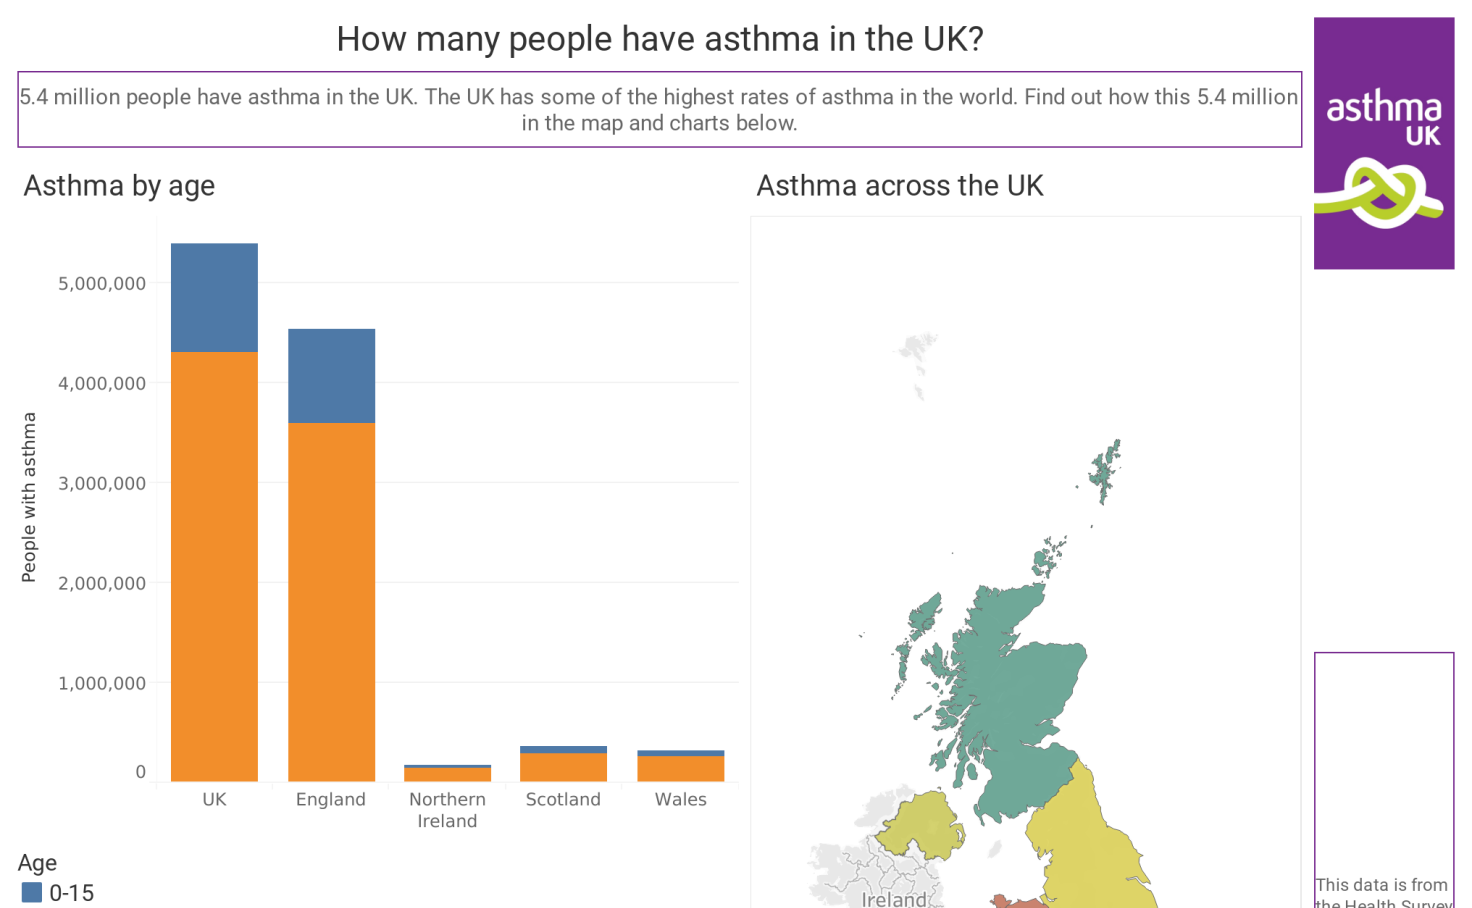 How many people have asthma in the UK?